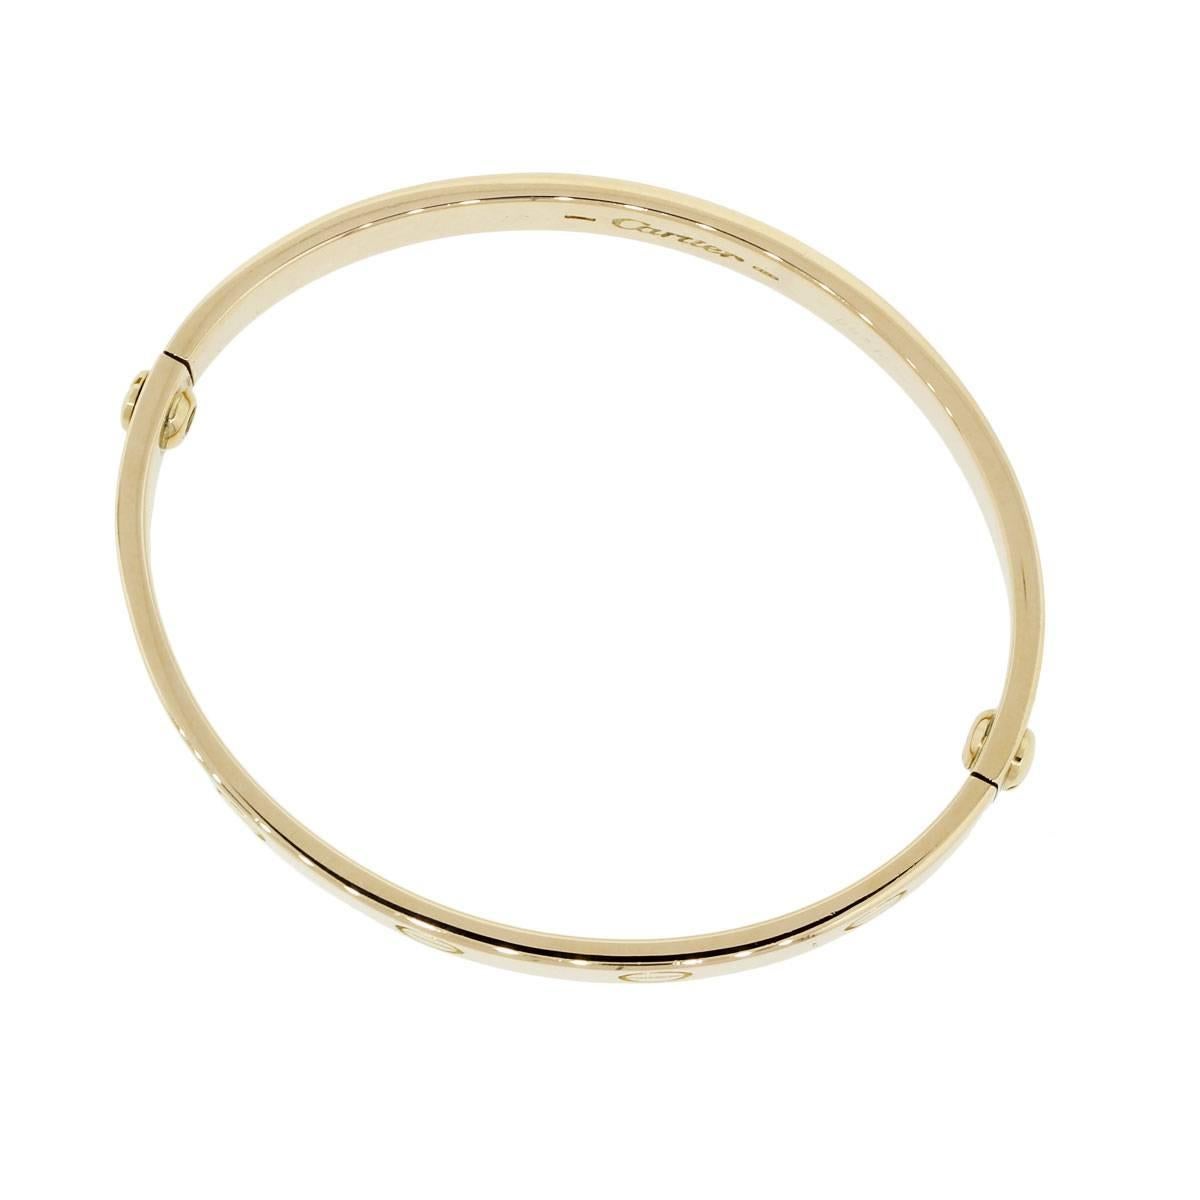 Brand: Cartier
Style: Love Bangle
Metal: 18K Yellow Gold
Bracelet Size: Cartier size 16 (will fit a 5.75" wrist)
Total Weight: 29.3g (18.9dwt)
Closure: (2) Screw Closure
Additional Details: Comes with Raymond Lee Jewelers Presentation